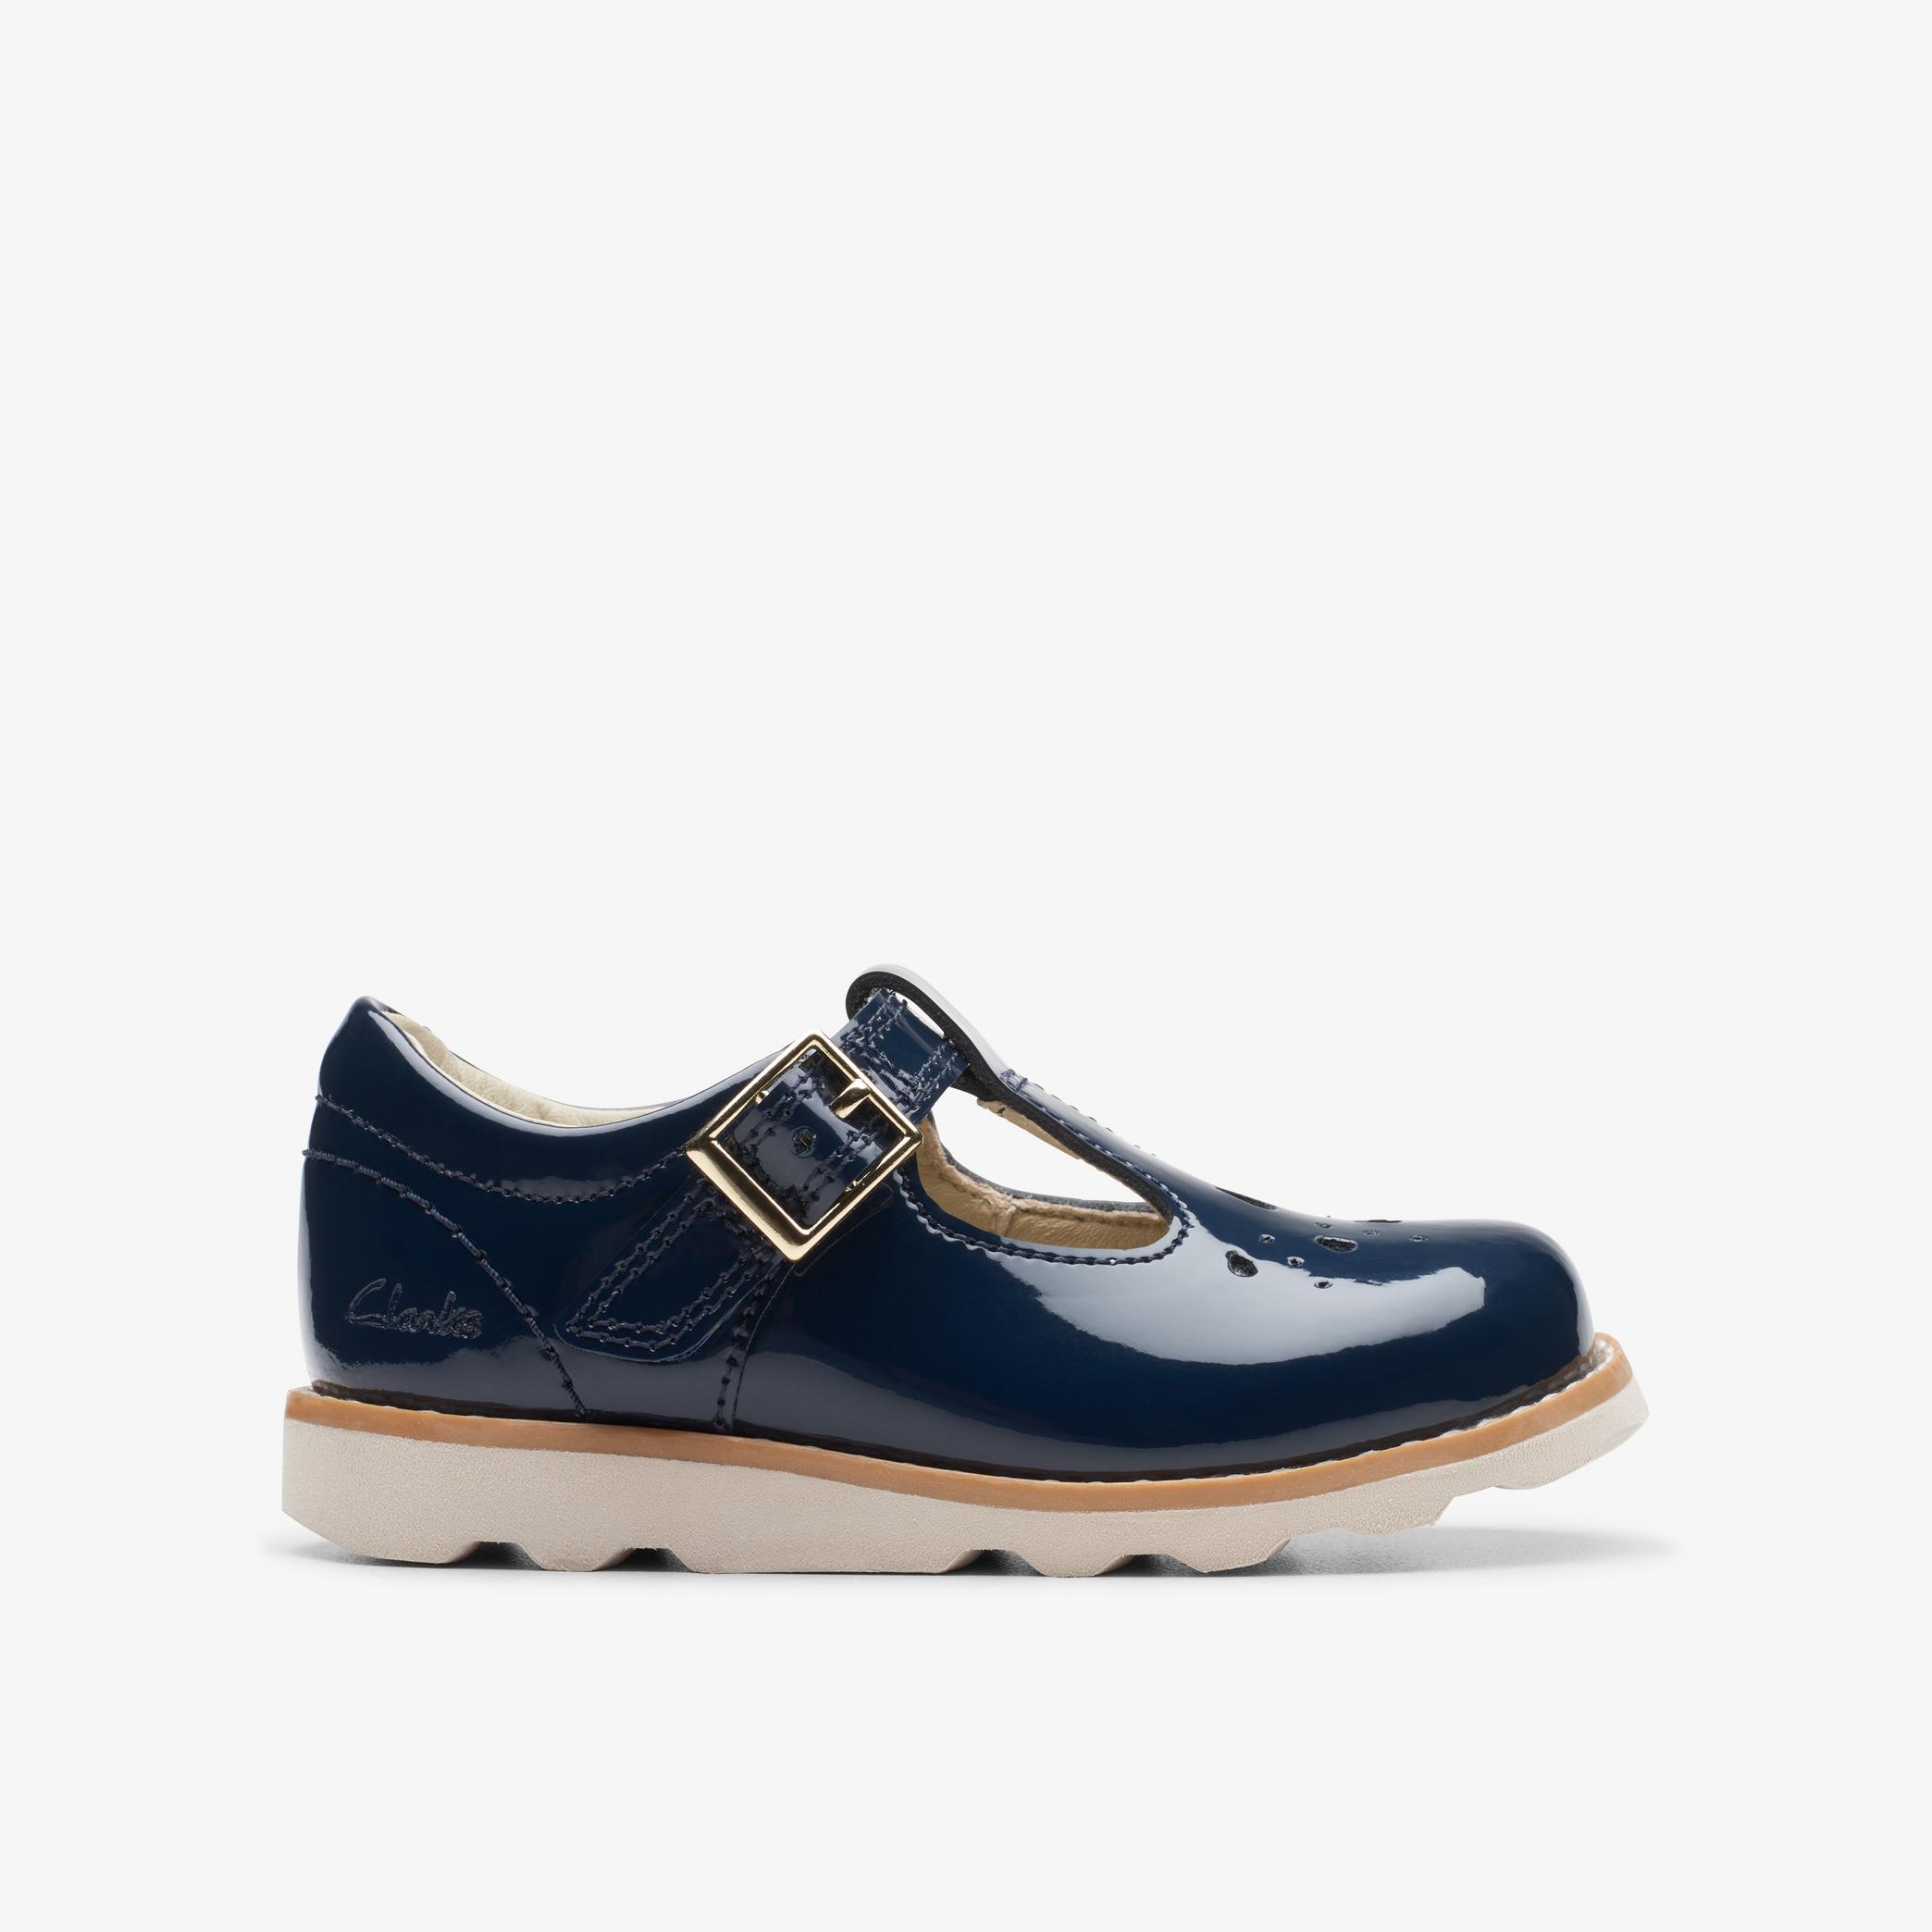 Crown Print Toddler Navy Patent T Bar Shoes, view 1 of 6